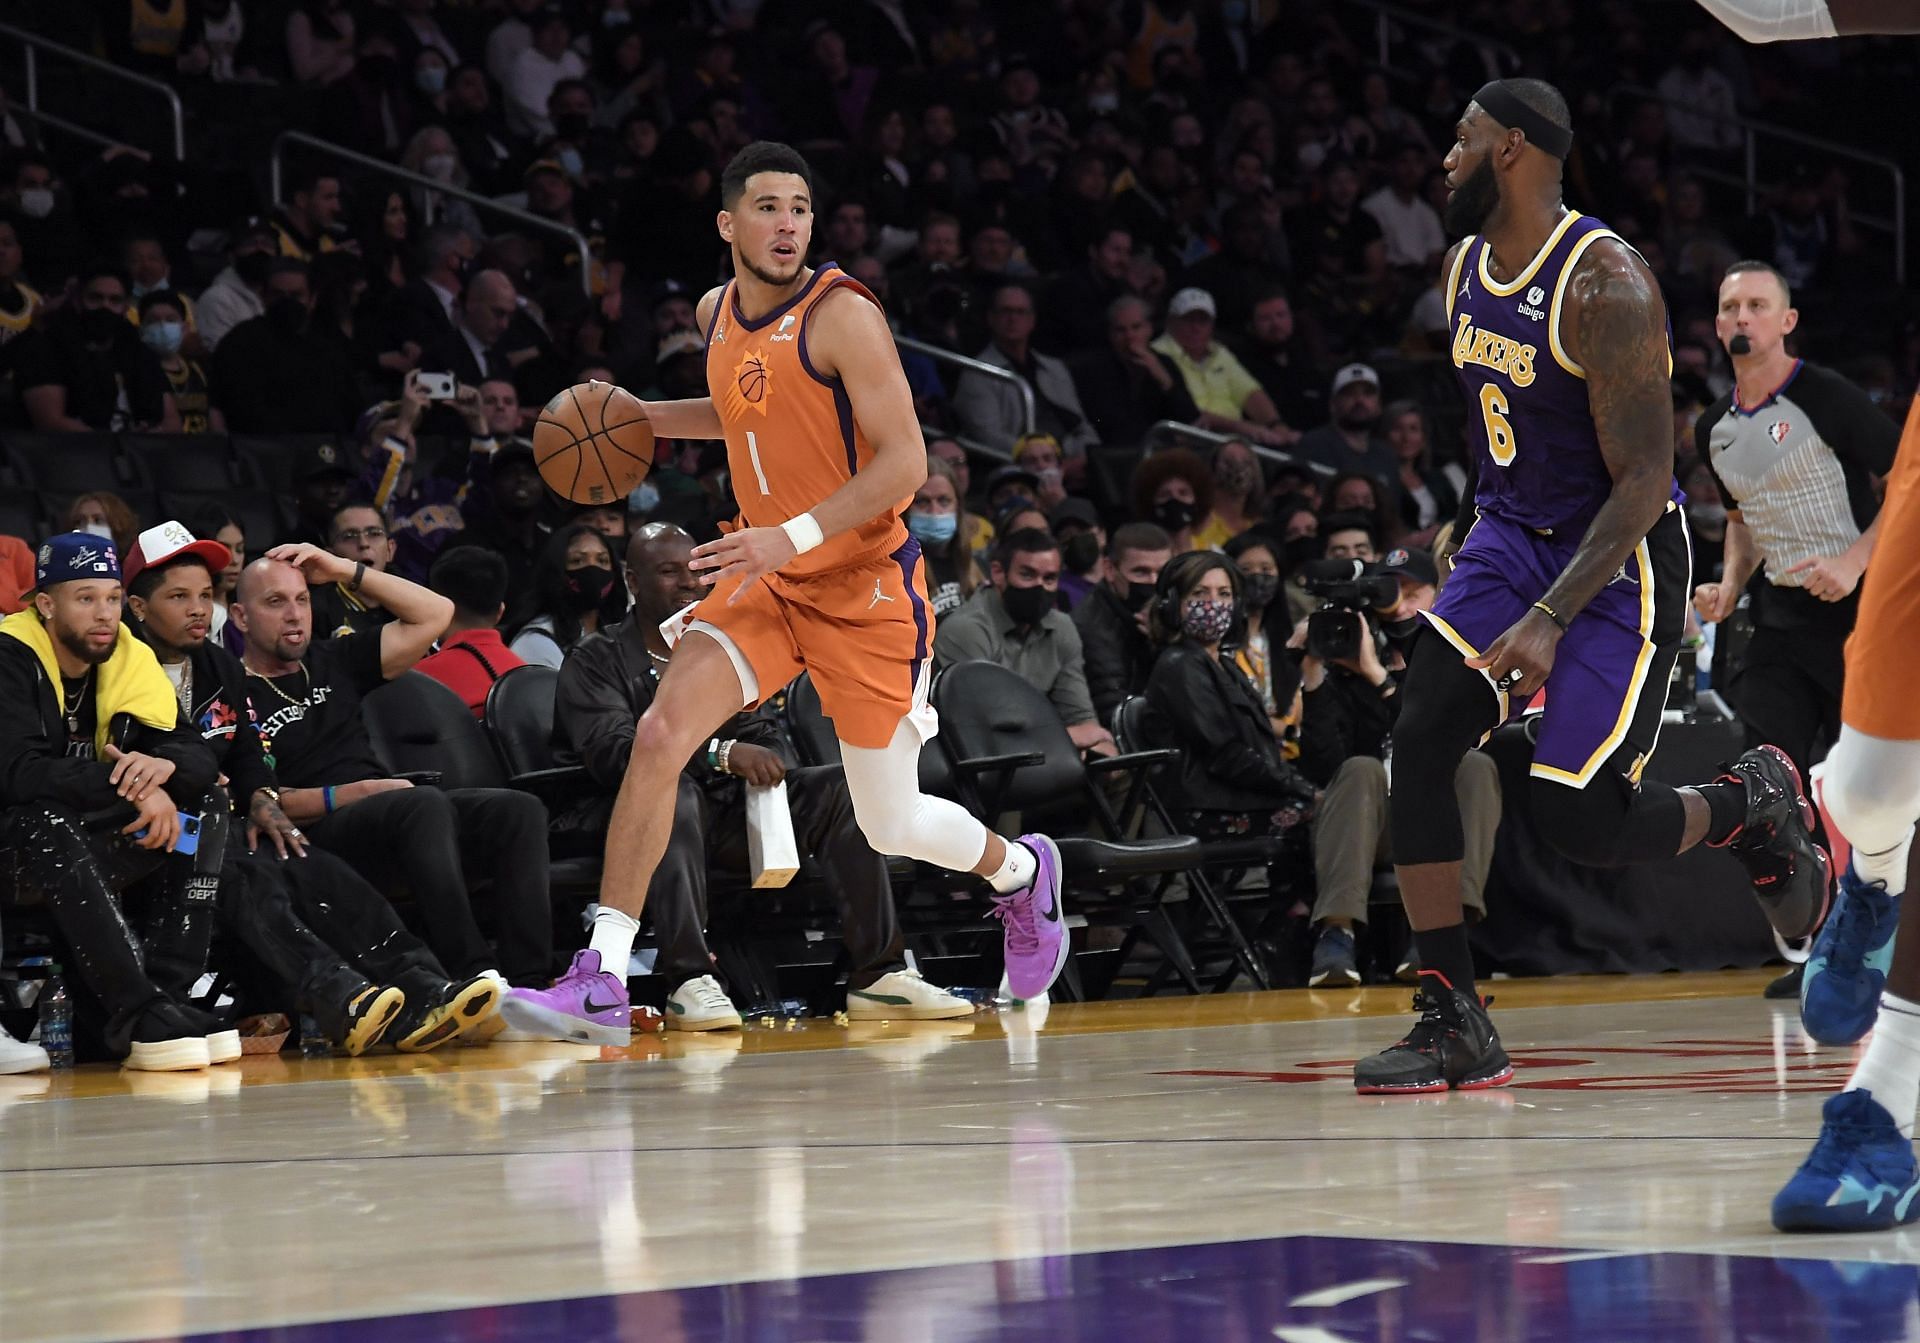 Devin Booker has proven to be a gifted scorer and playmaker for the Phoenix Suns in the NBA